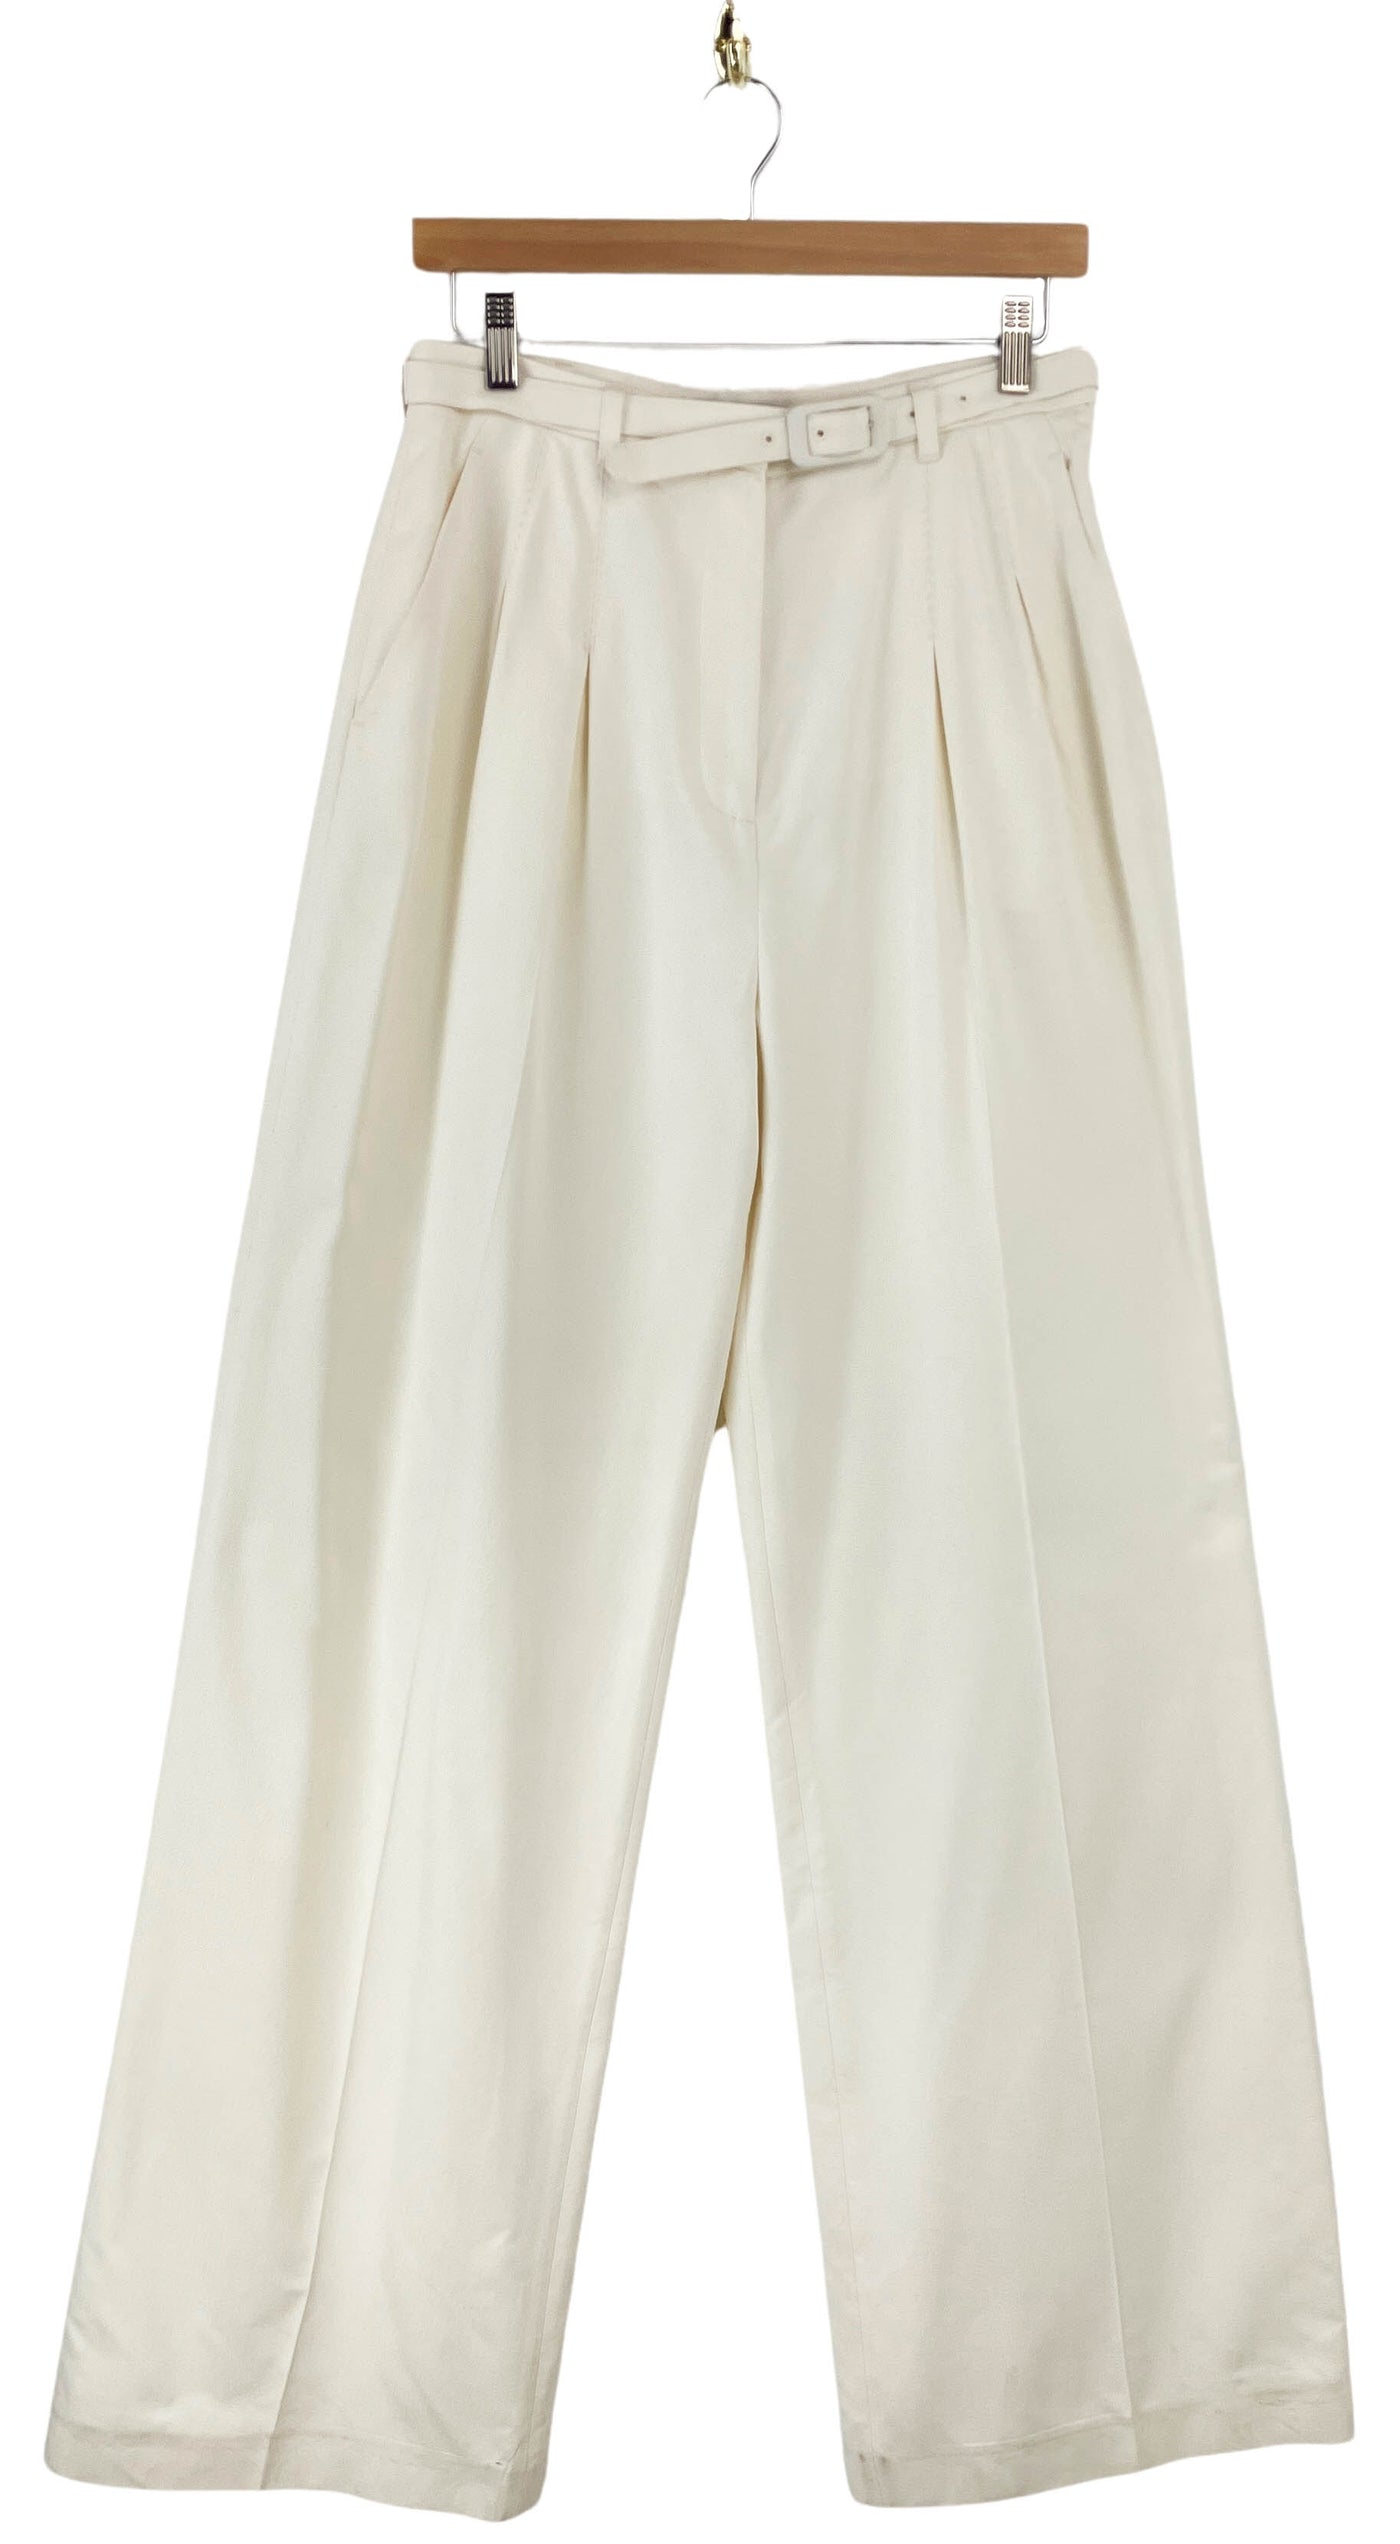 Gabriela Hearst Vargas Trousers in Off White - Discounts on Gabriela Hearst at UAL